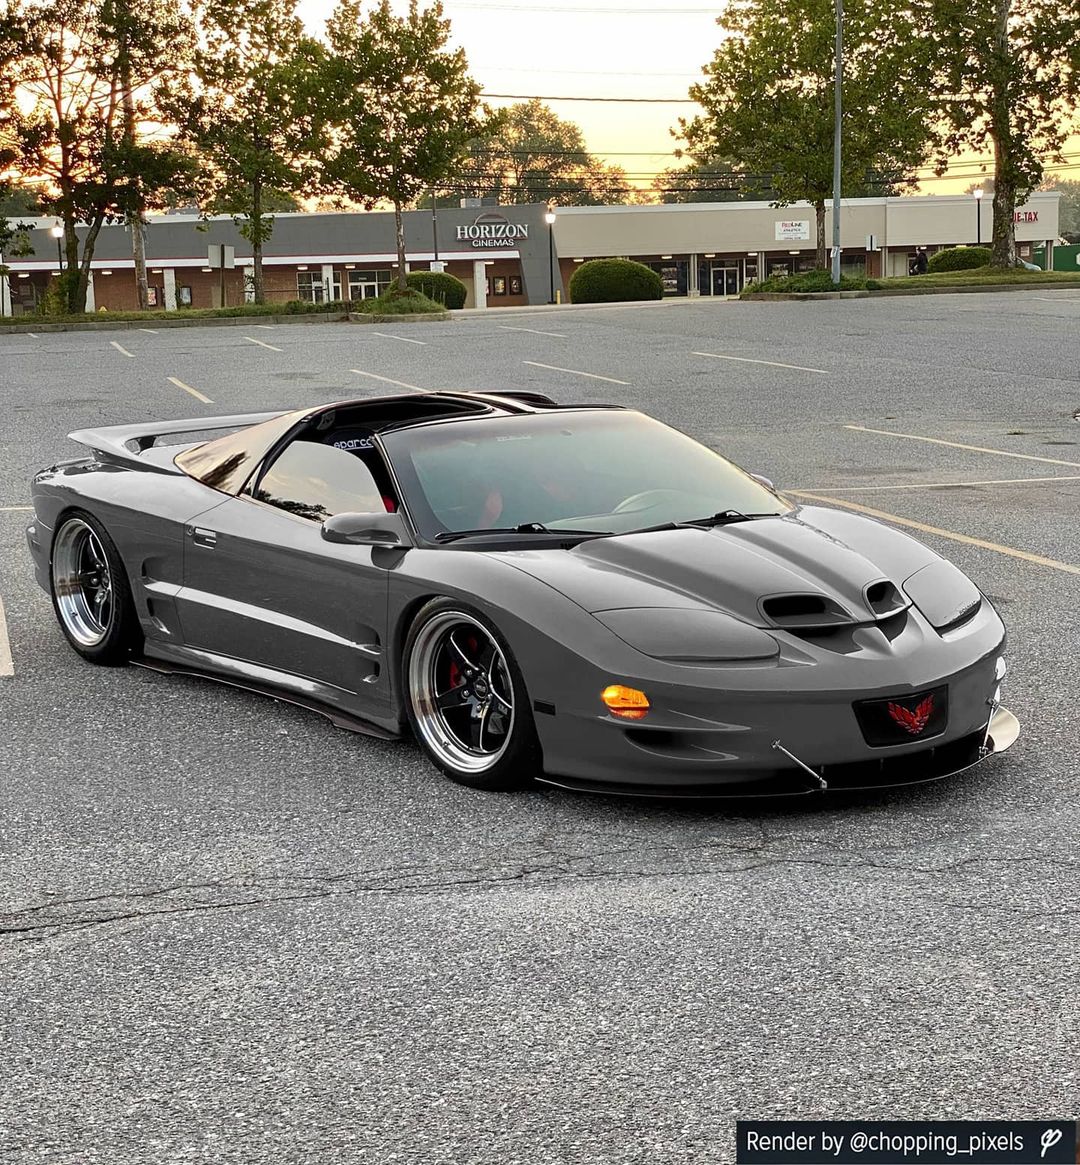 Mid-Engined Pontiac Firebird Trans Am Looks Like Acura NSX Rival in This Re...